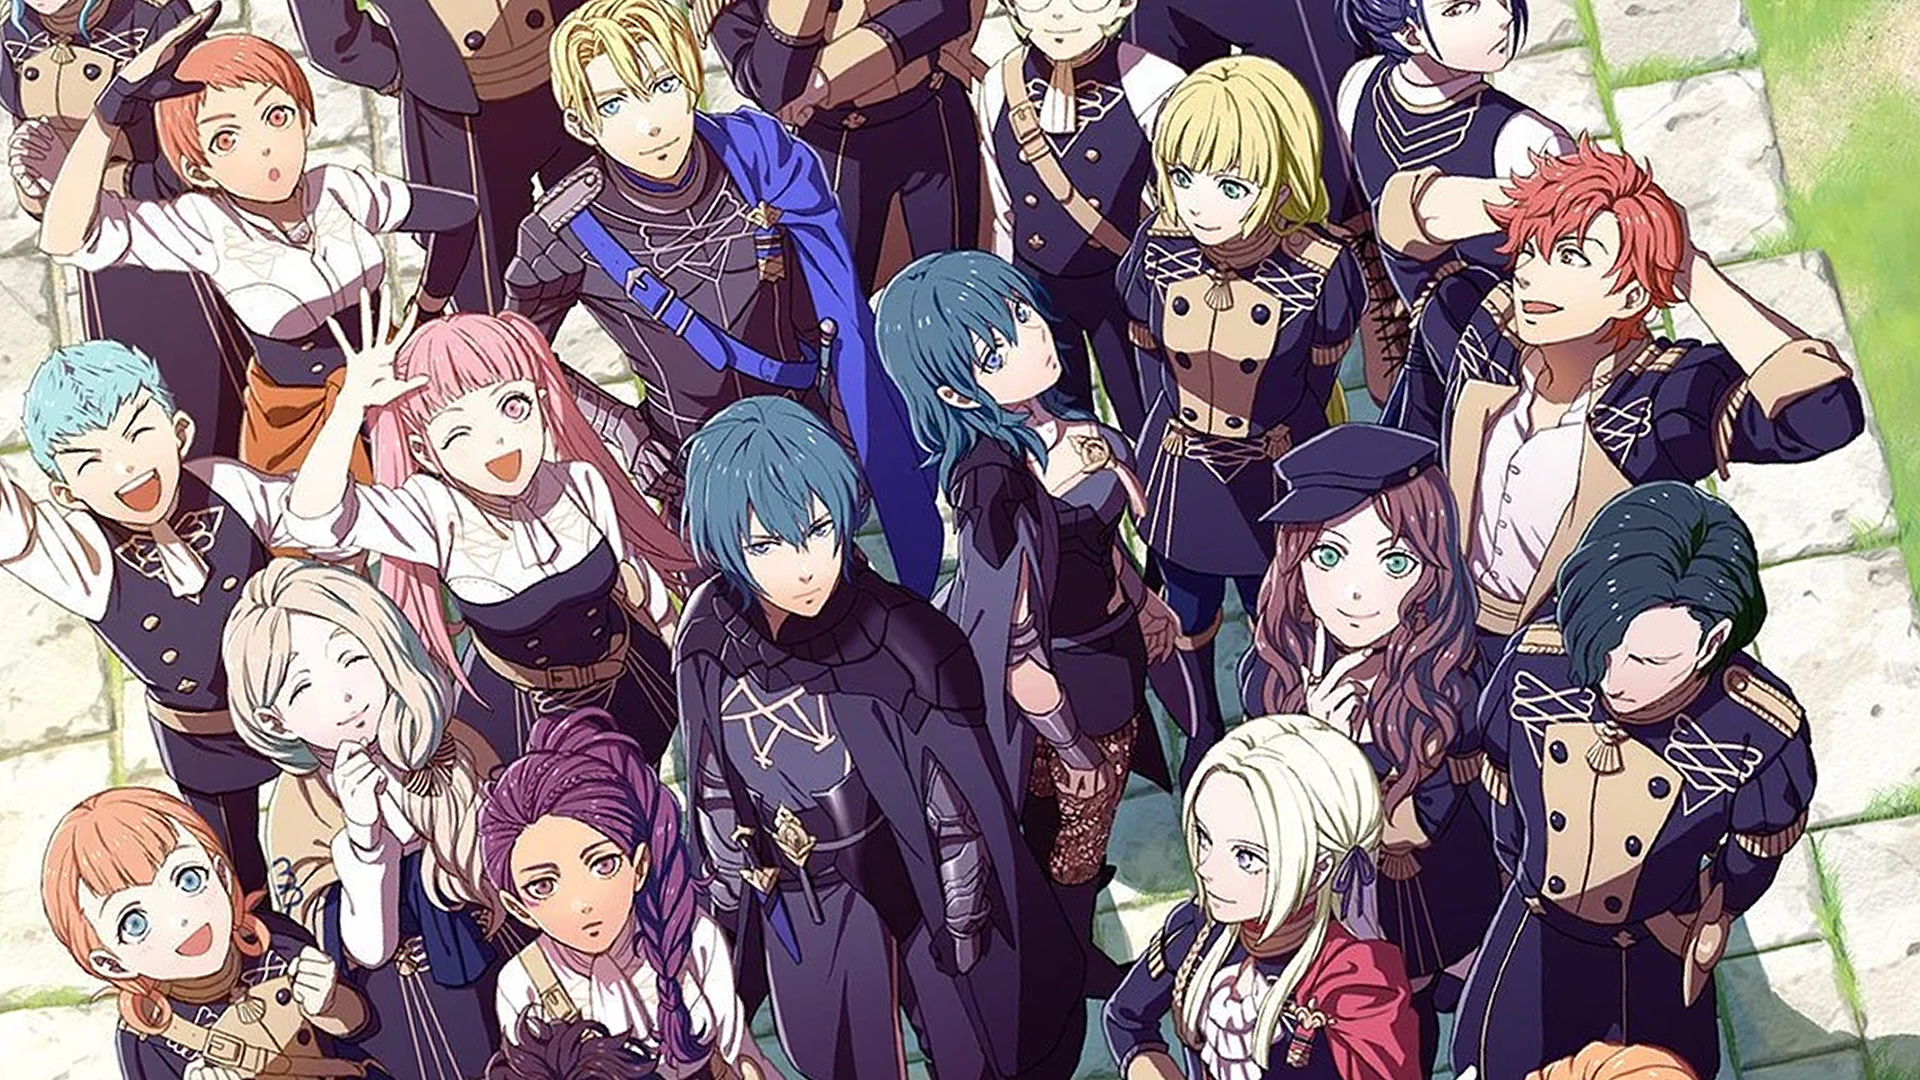 Fire Emblem: Three Houses - Dialogue Choices, Consequences and Support  Guide/Walkthrough